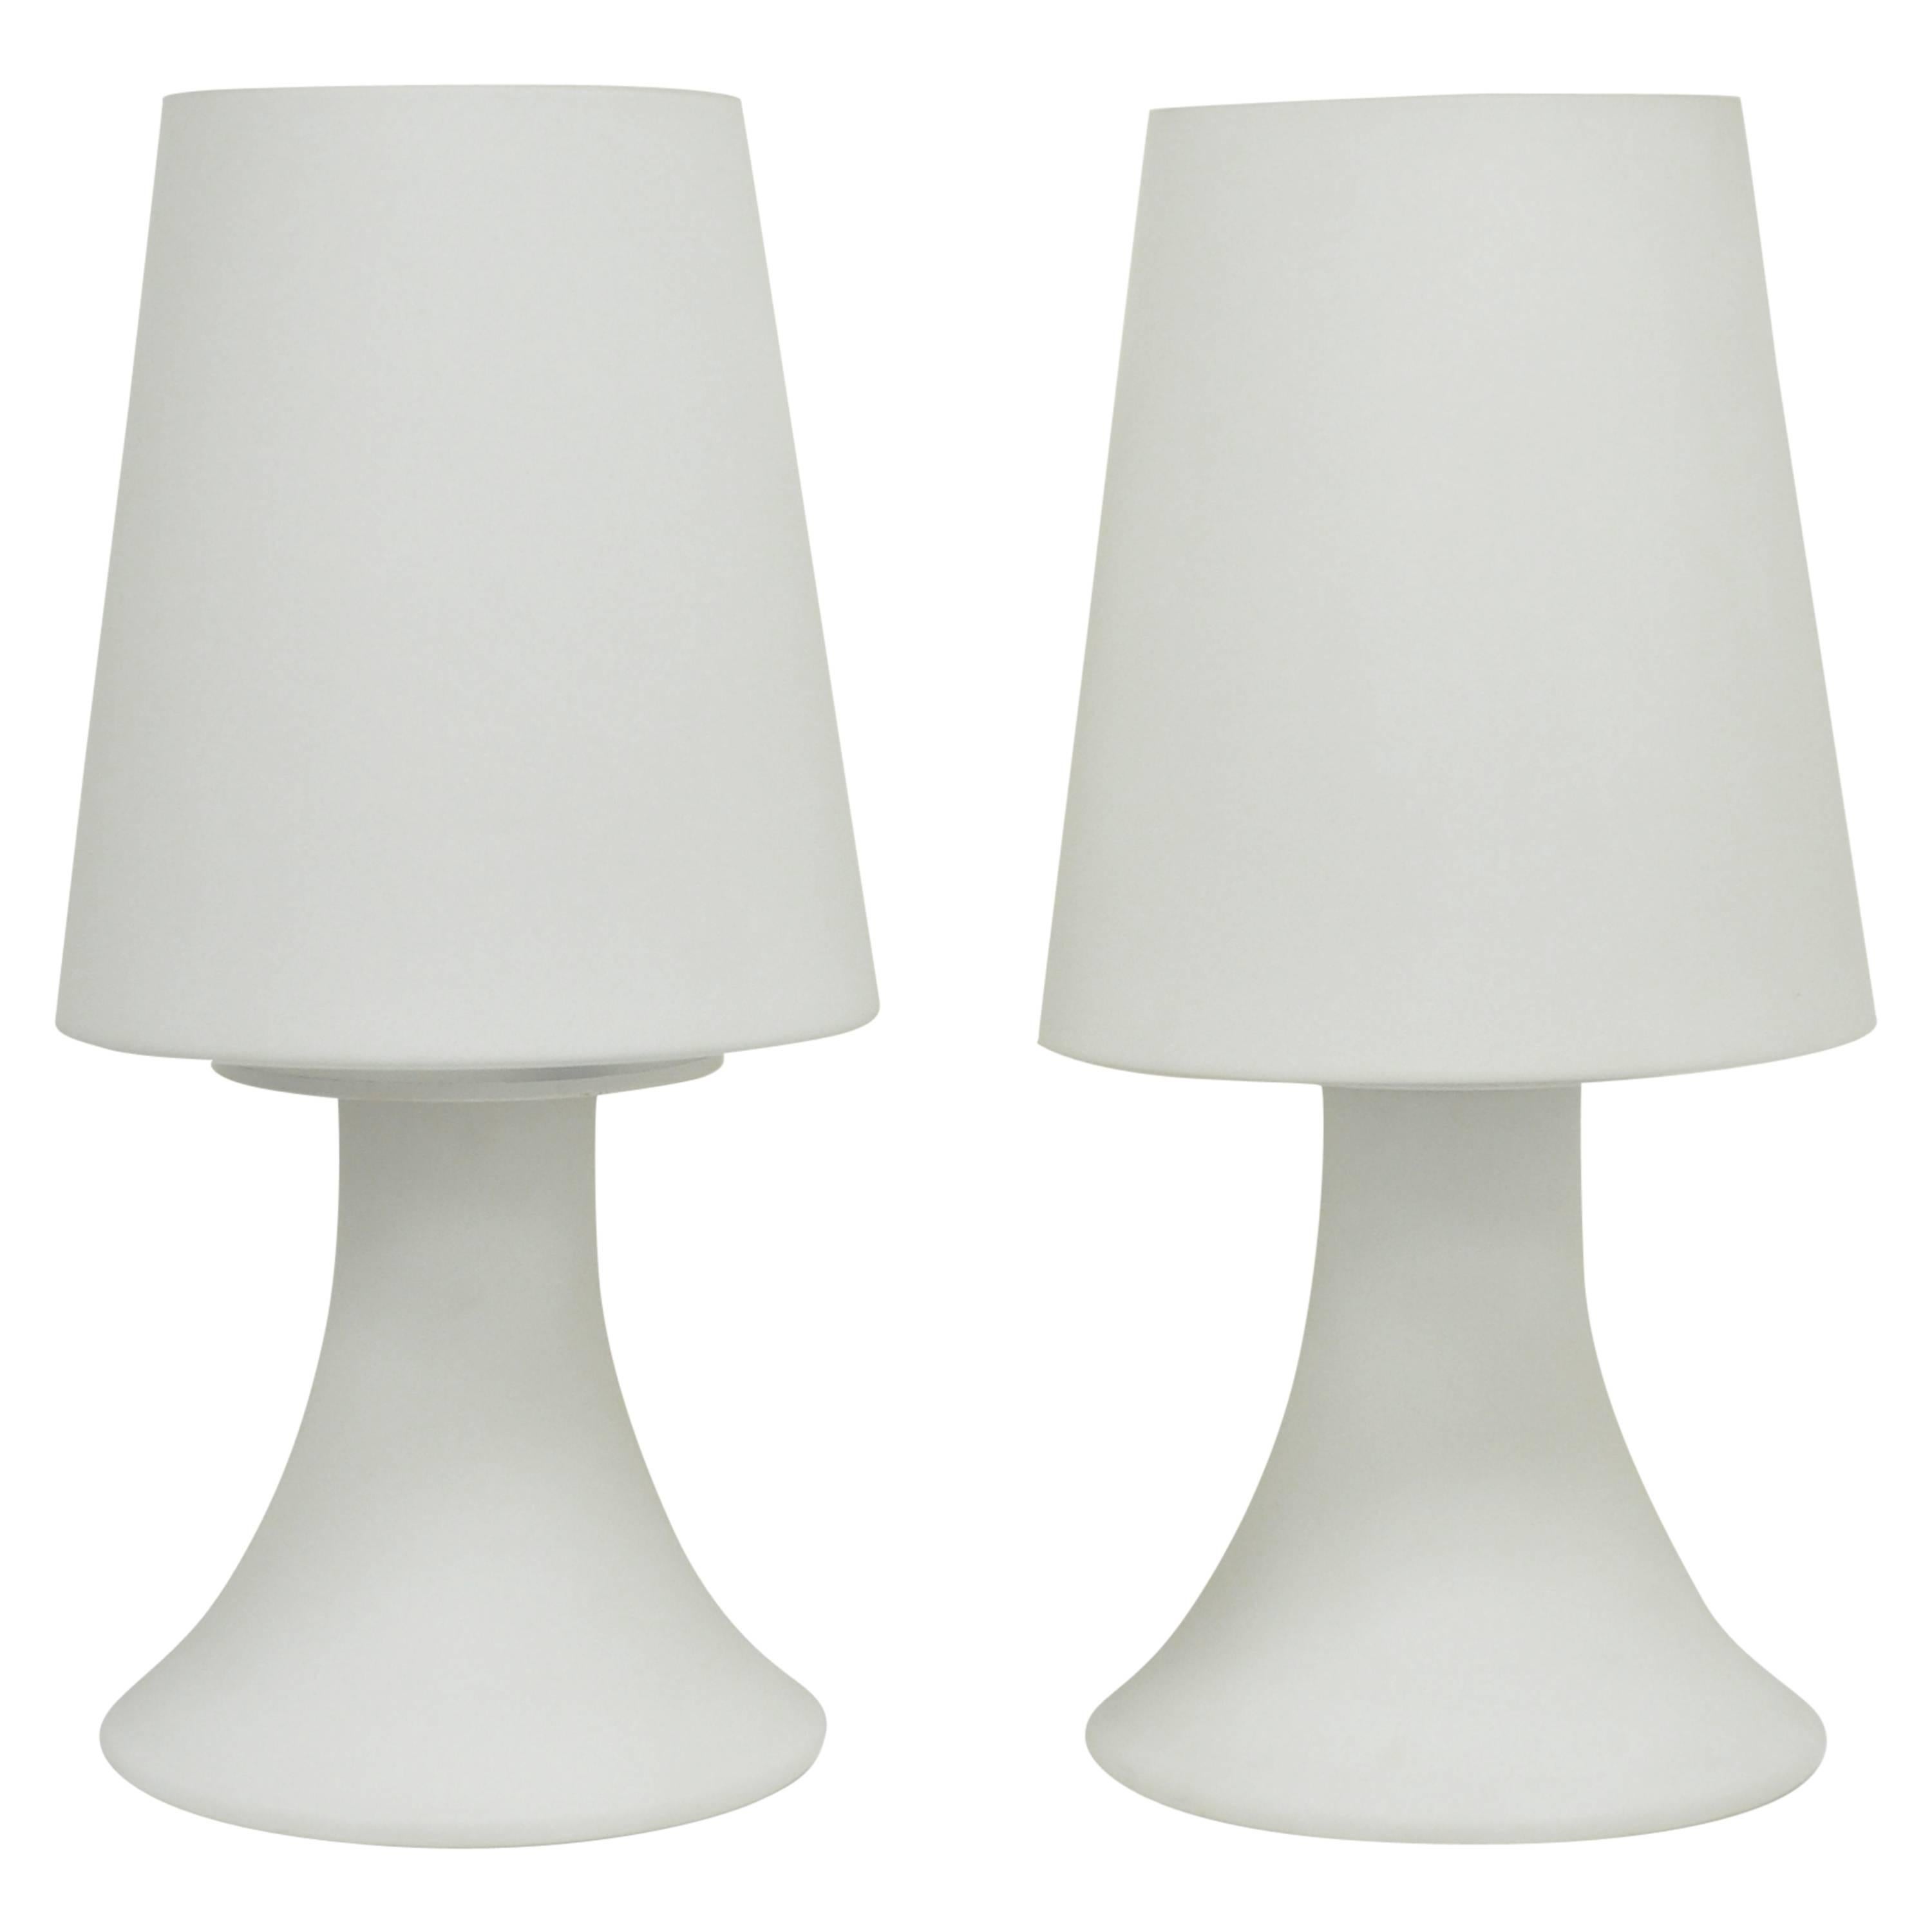 Pair of White Frosted Glass Mushroom Table Lamps by Laurel